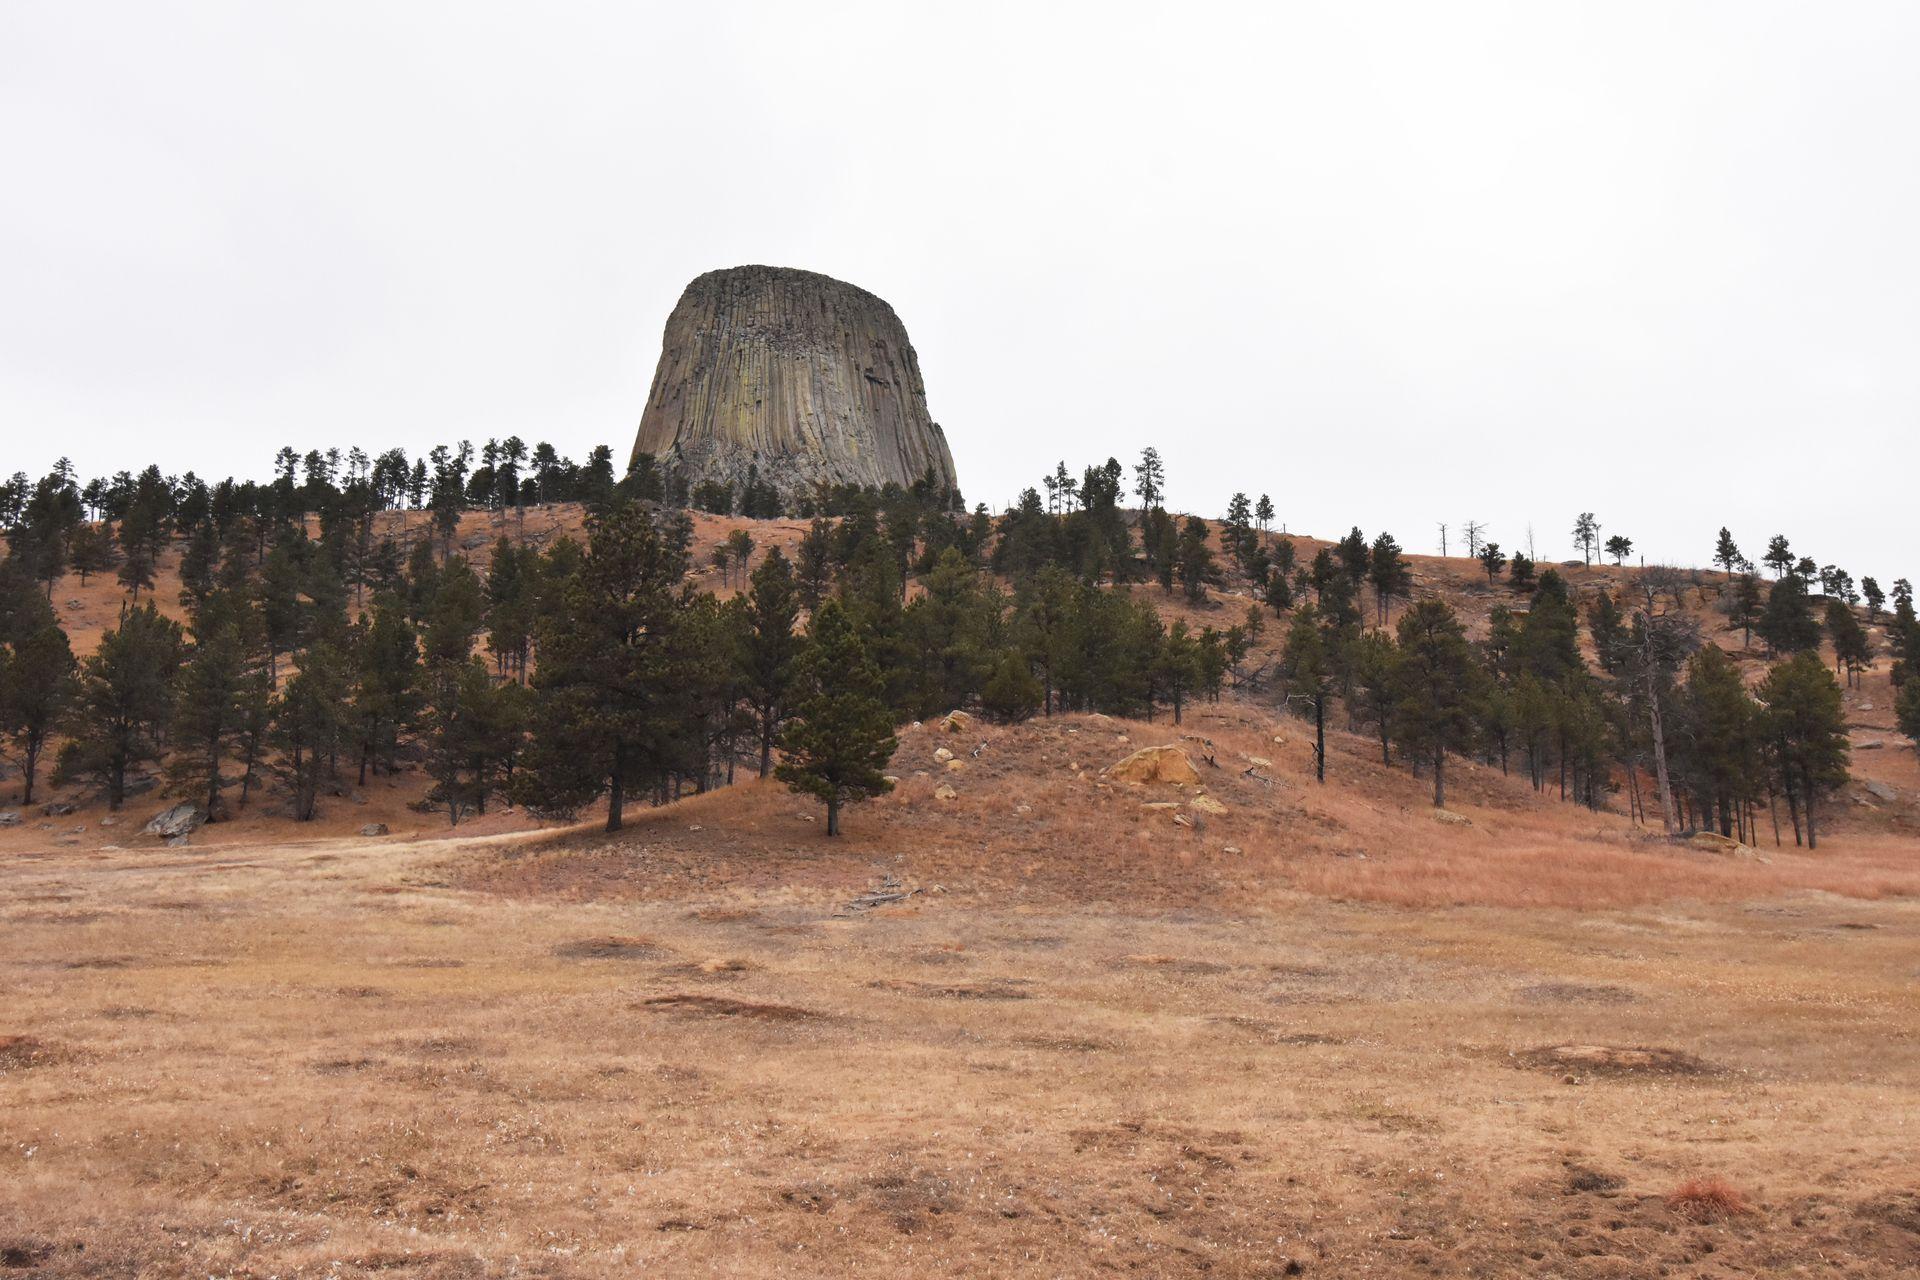 A prairie dog town with Devil's Tower in the background.